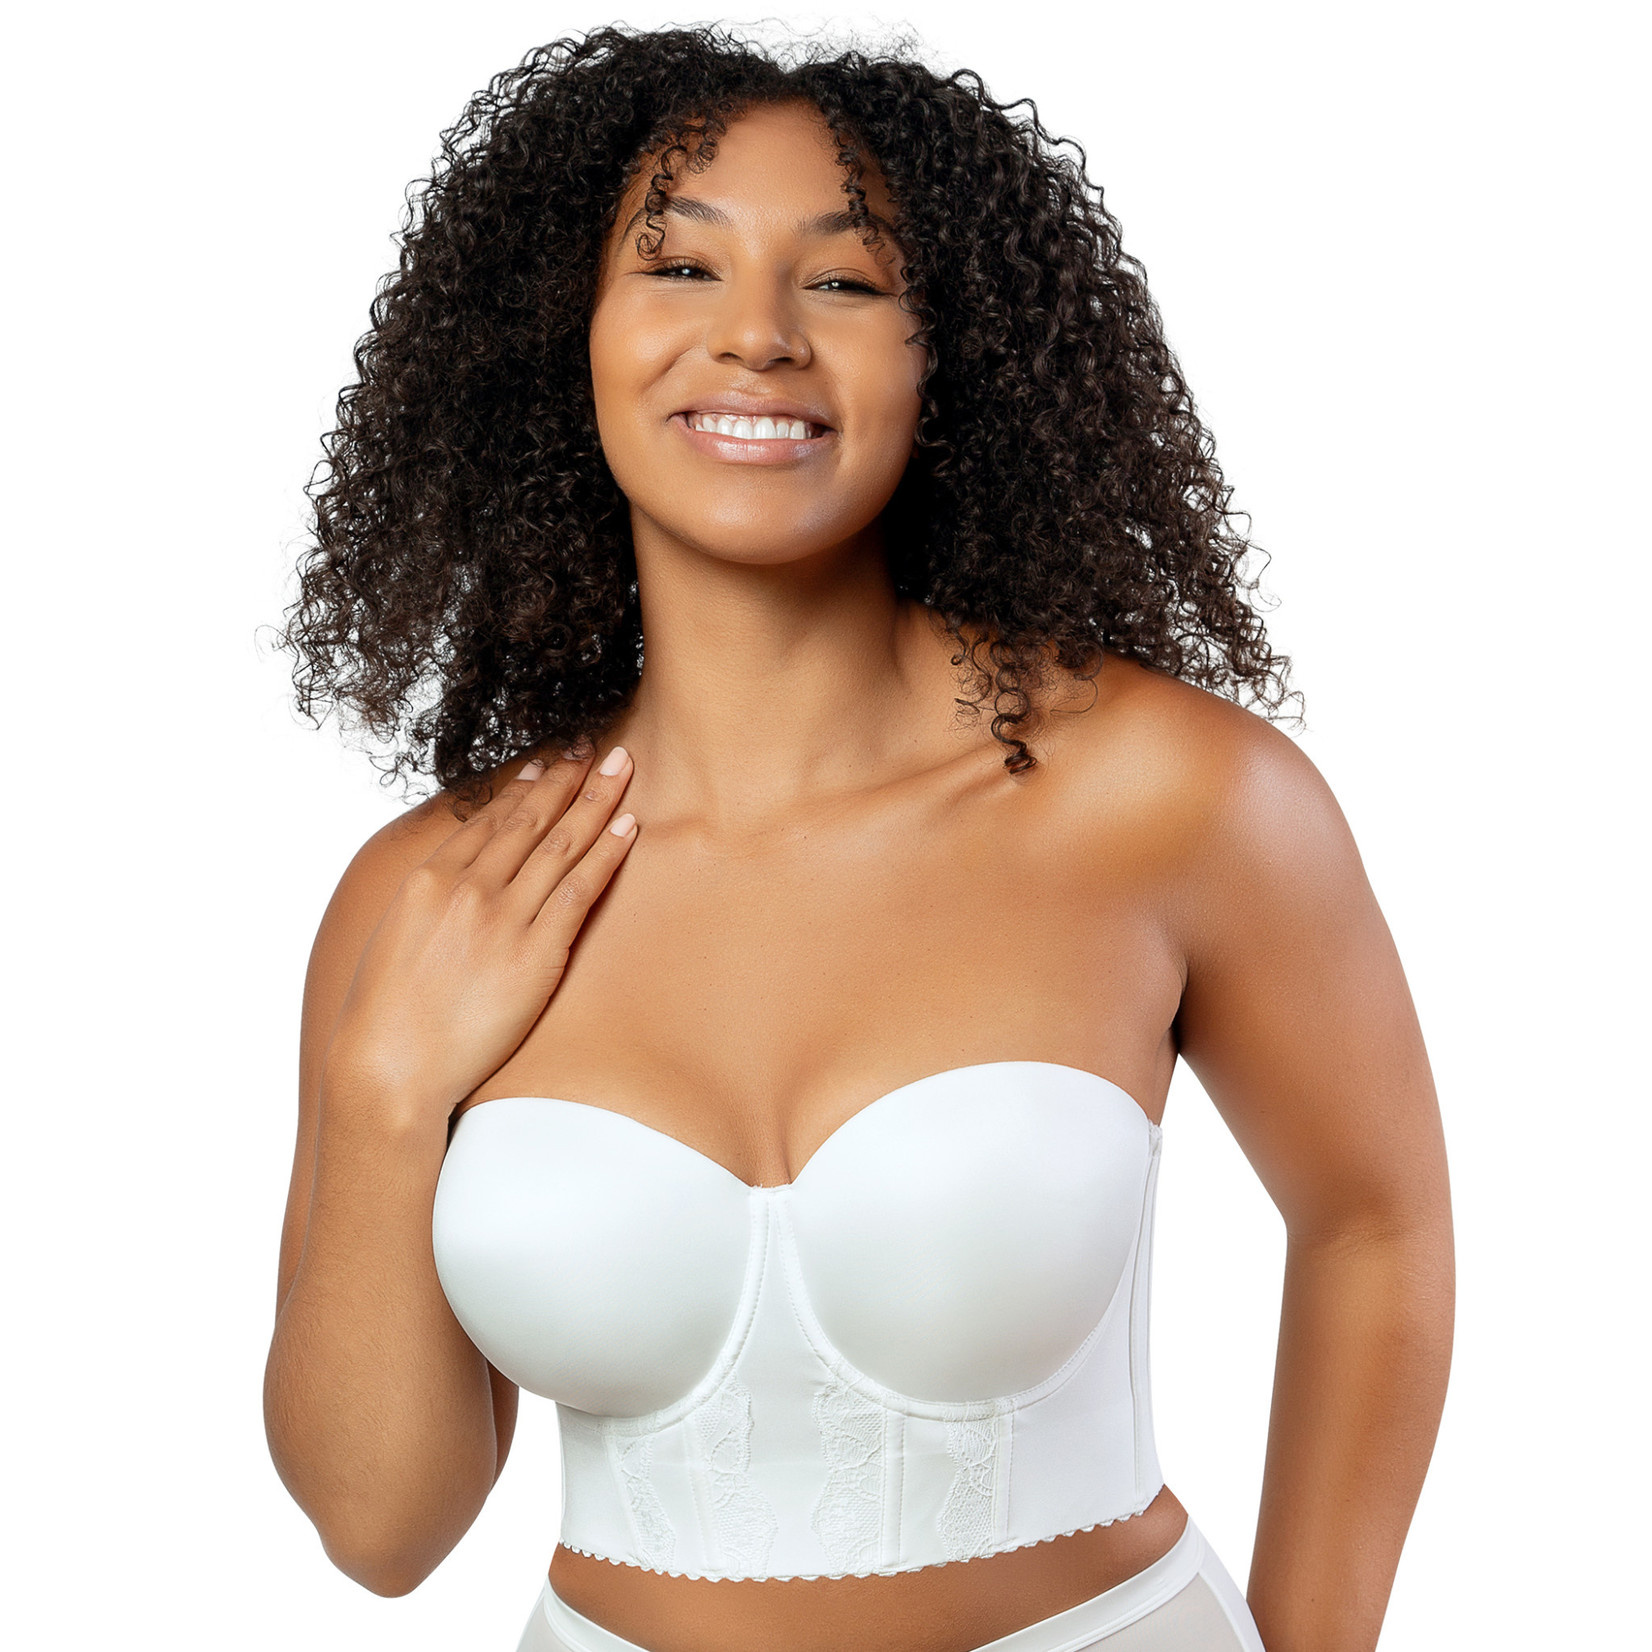 How to Find the Perfect Strapless Bra for Large Breasts? - Lucy's Boudoir